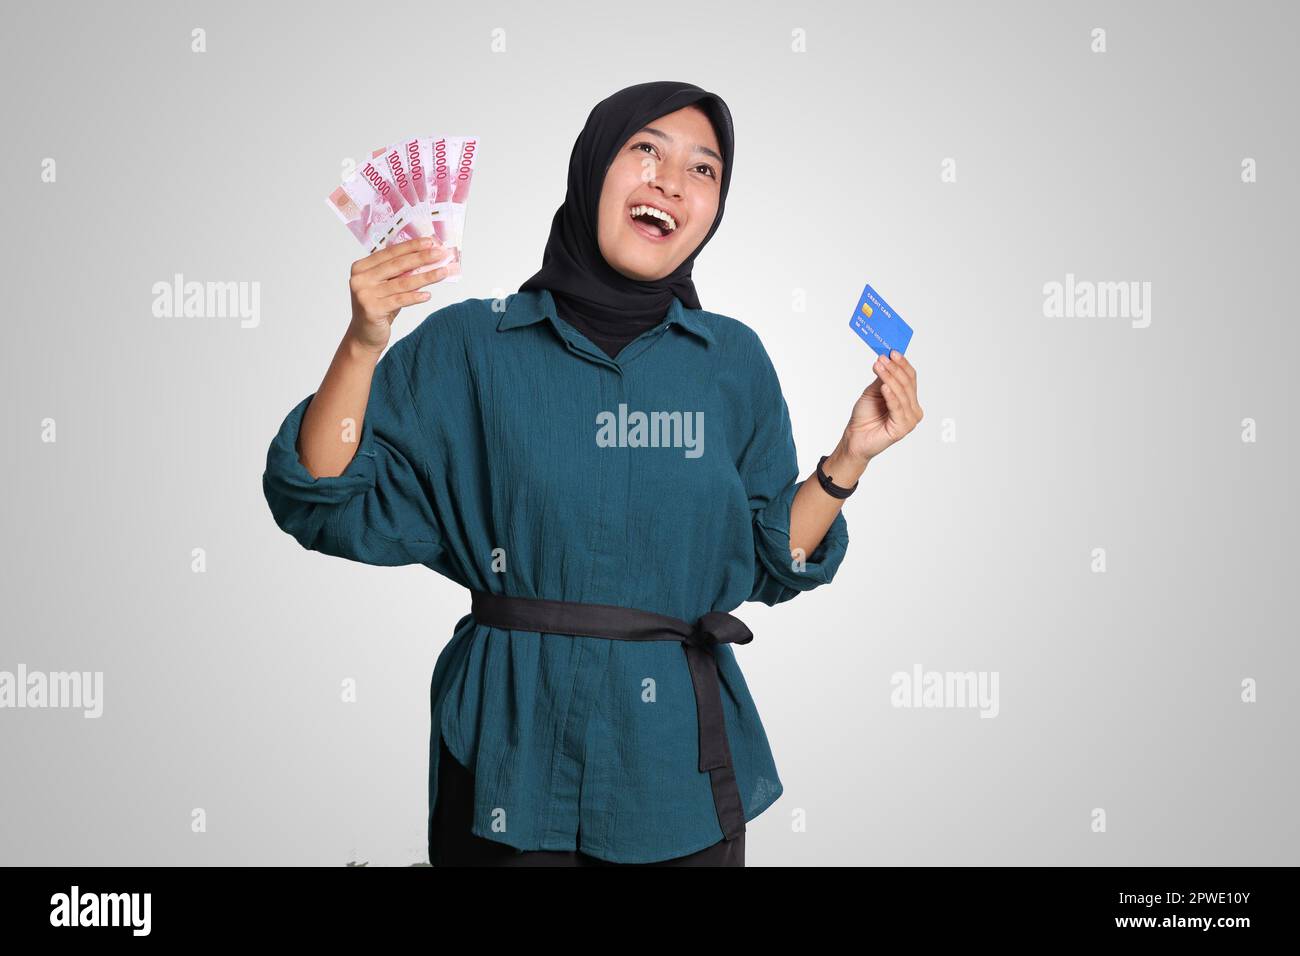 Portrait of cheerful Asian muslim woman with hijab, showing one hundred thousand rupiah while holding a credit card. Financial and savings concept. Is Stock Photo